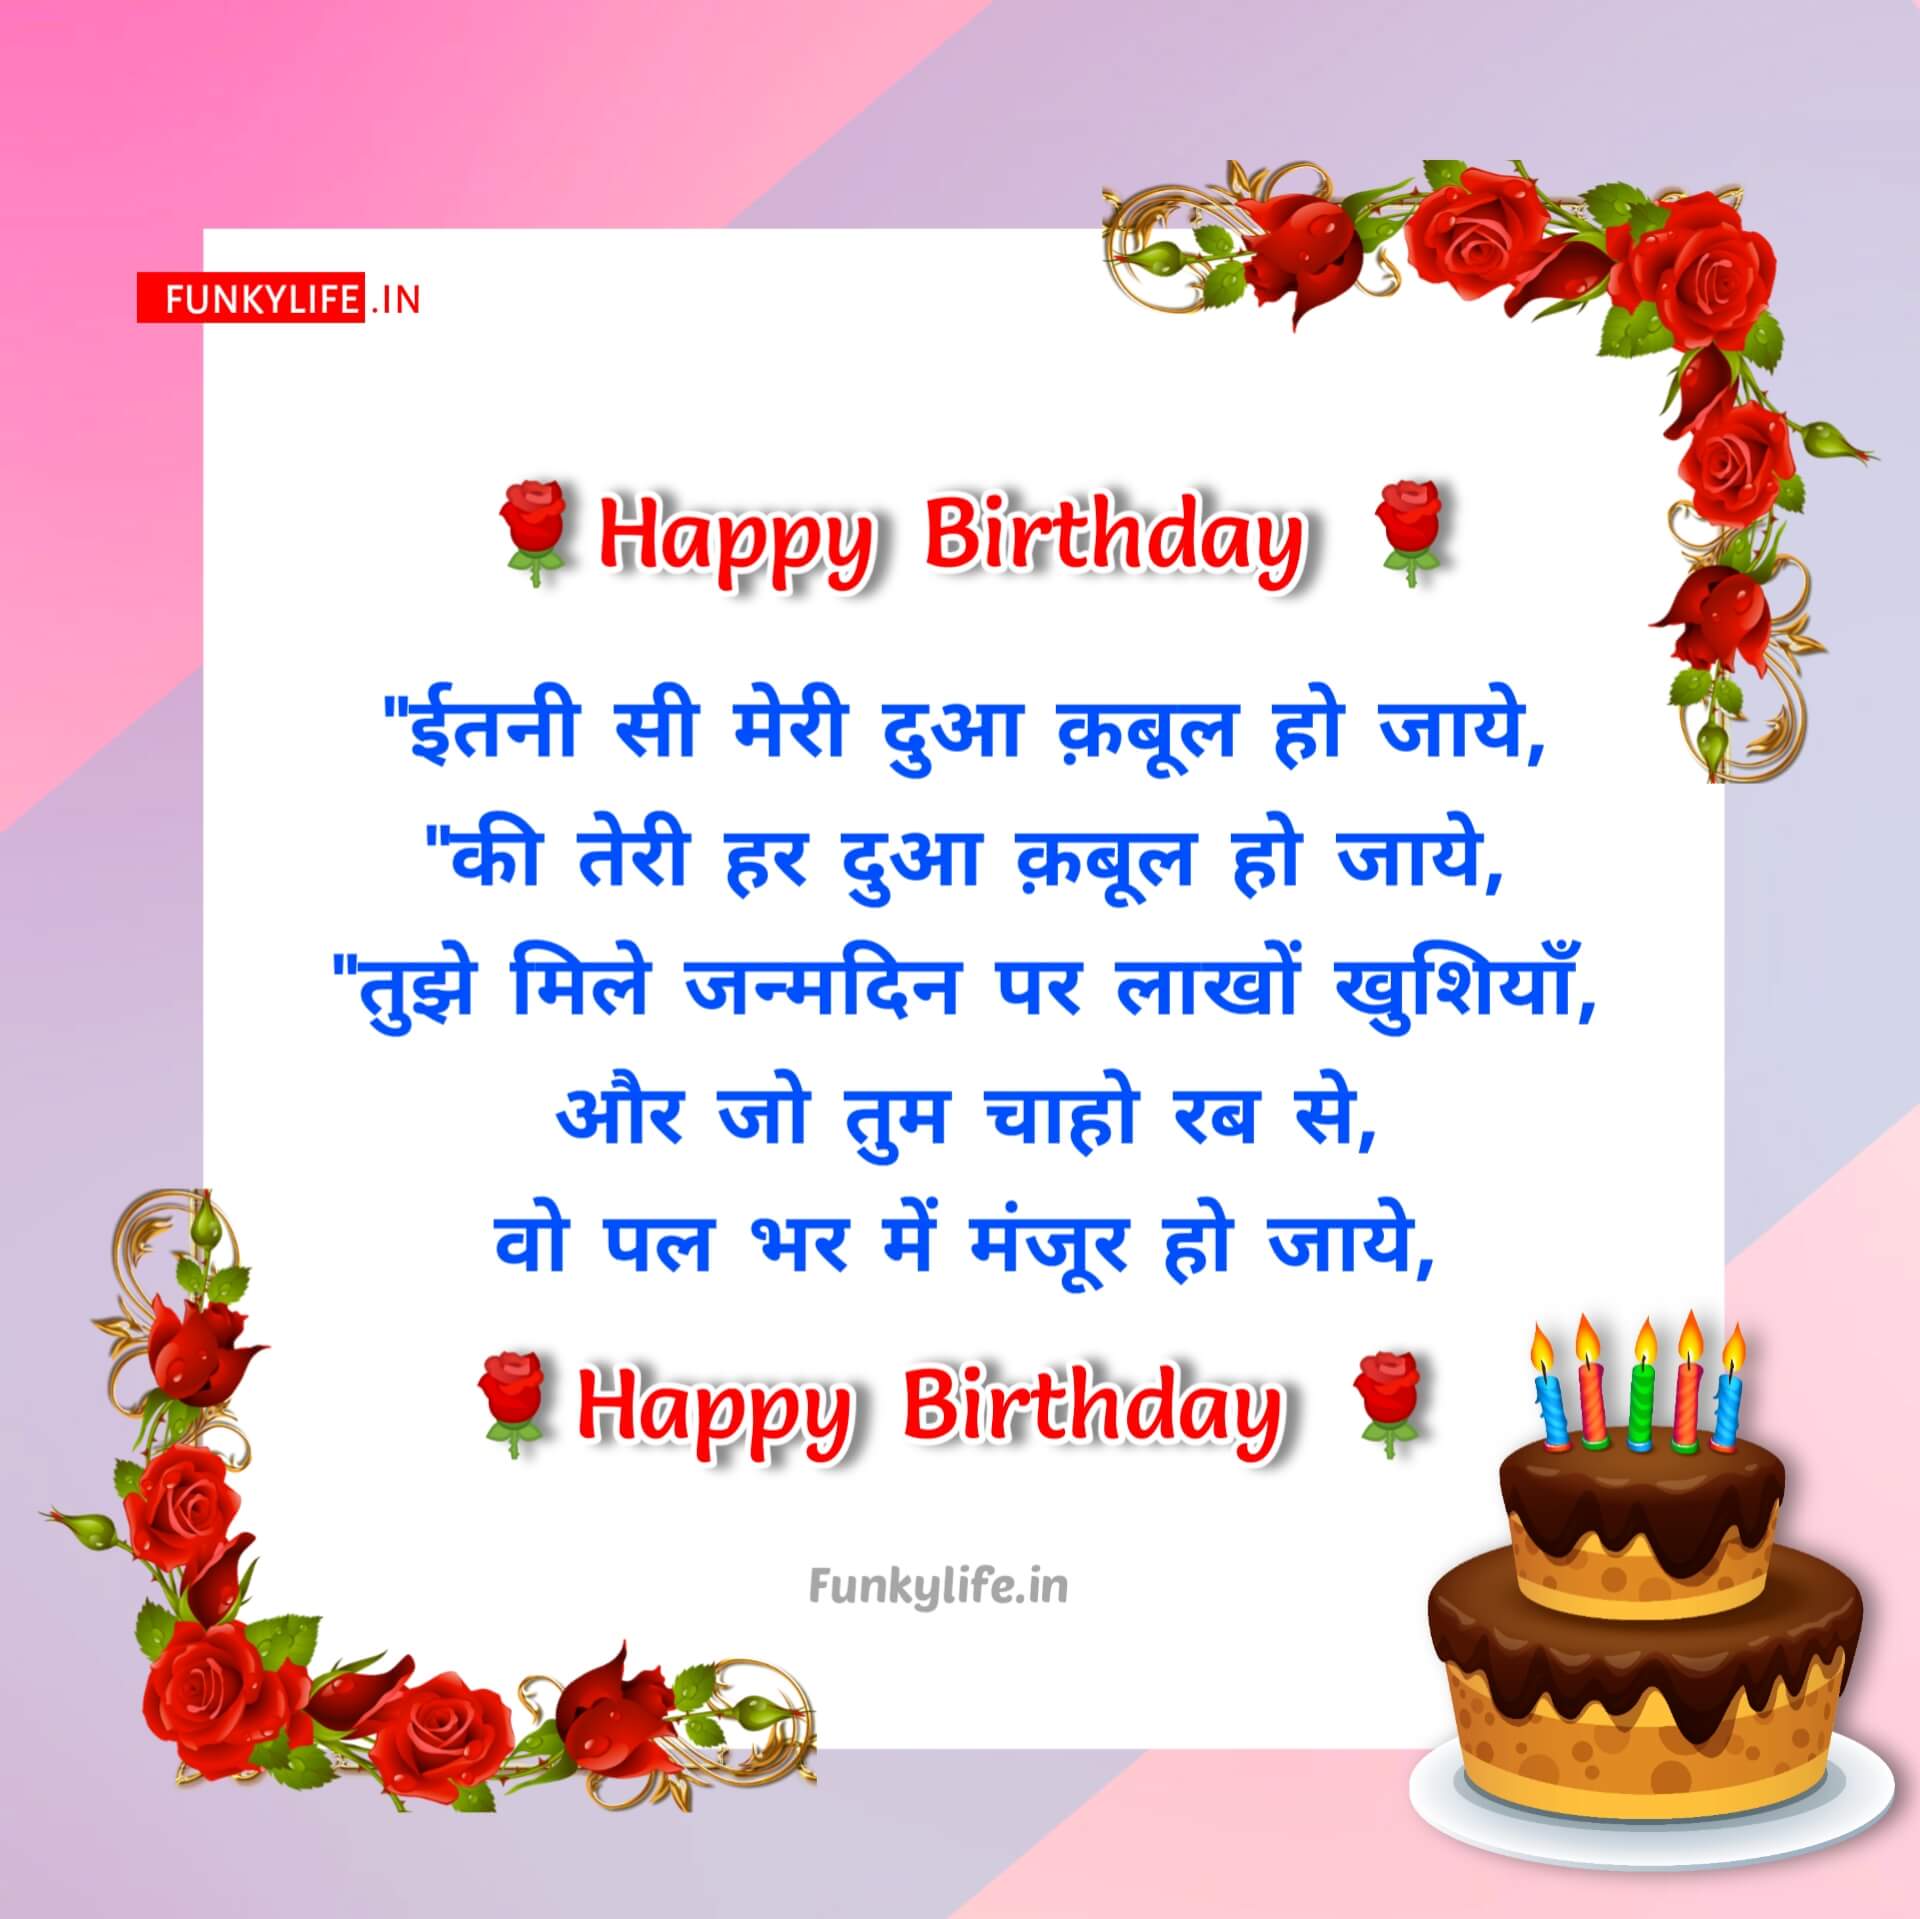 Happy Birthday Wishes in Hindi with Images